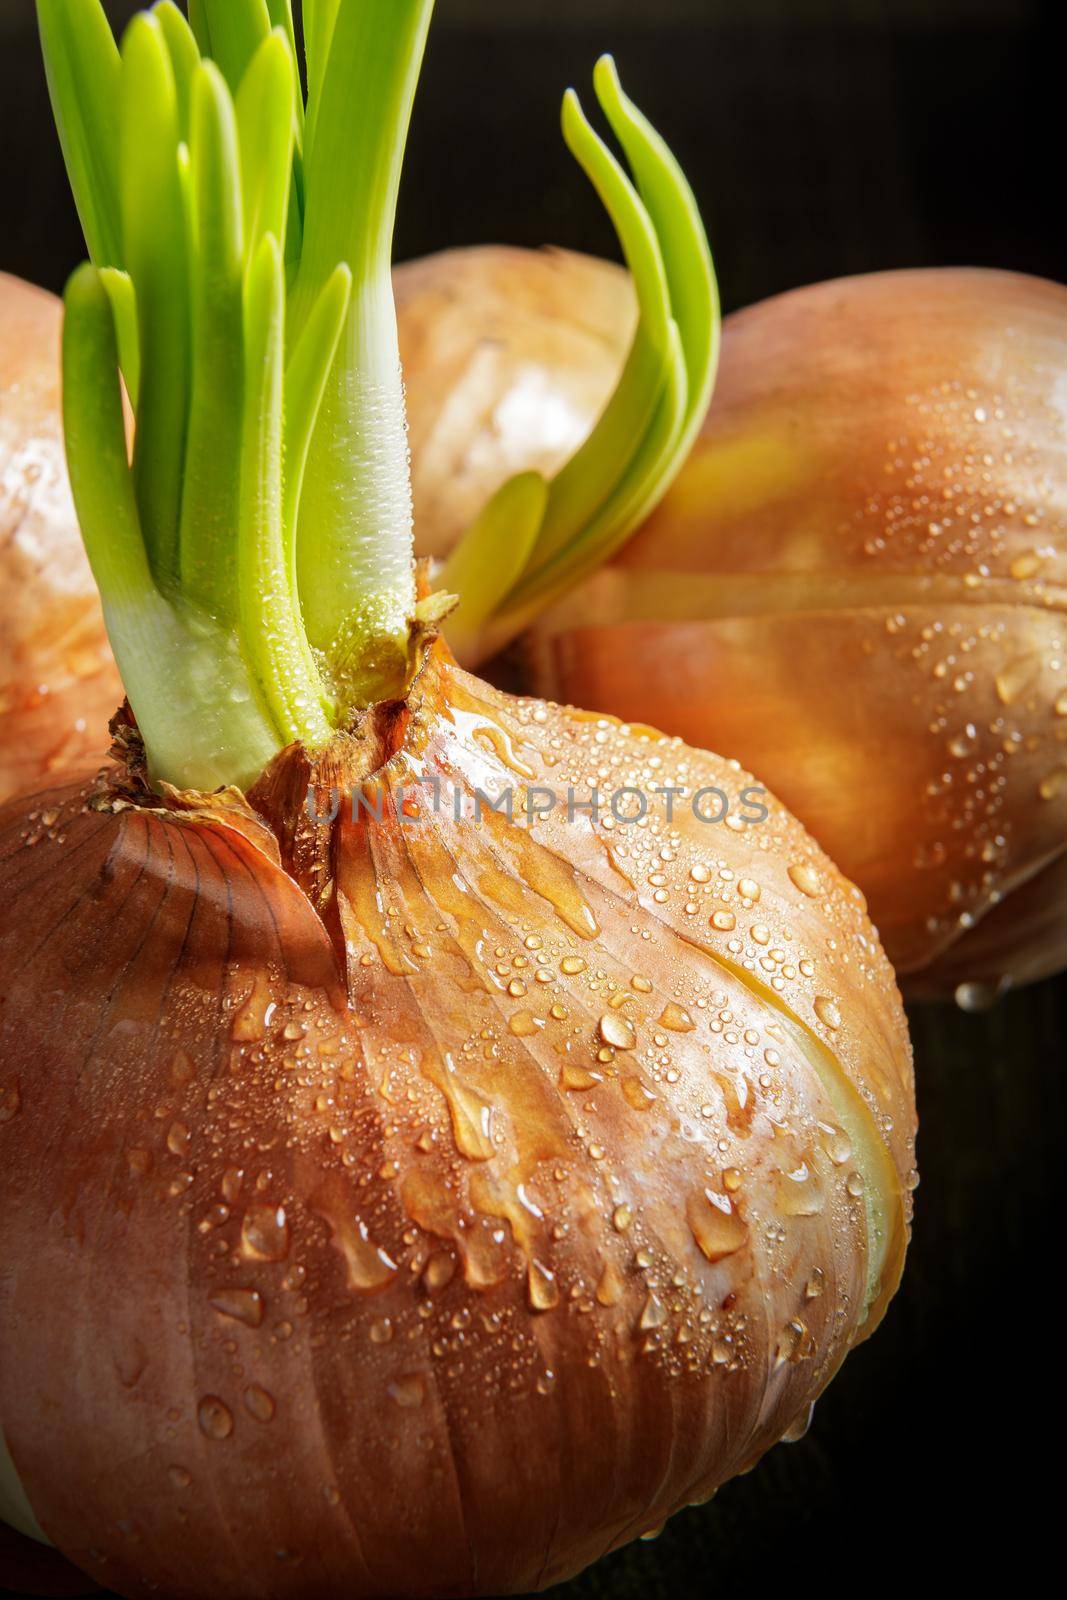 Large bulbs with sprouted green onions. Close-up.